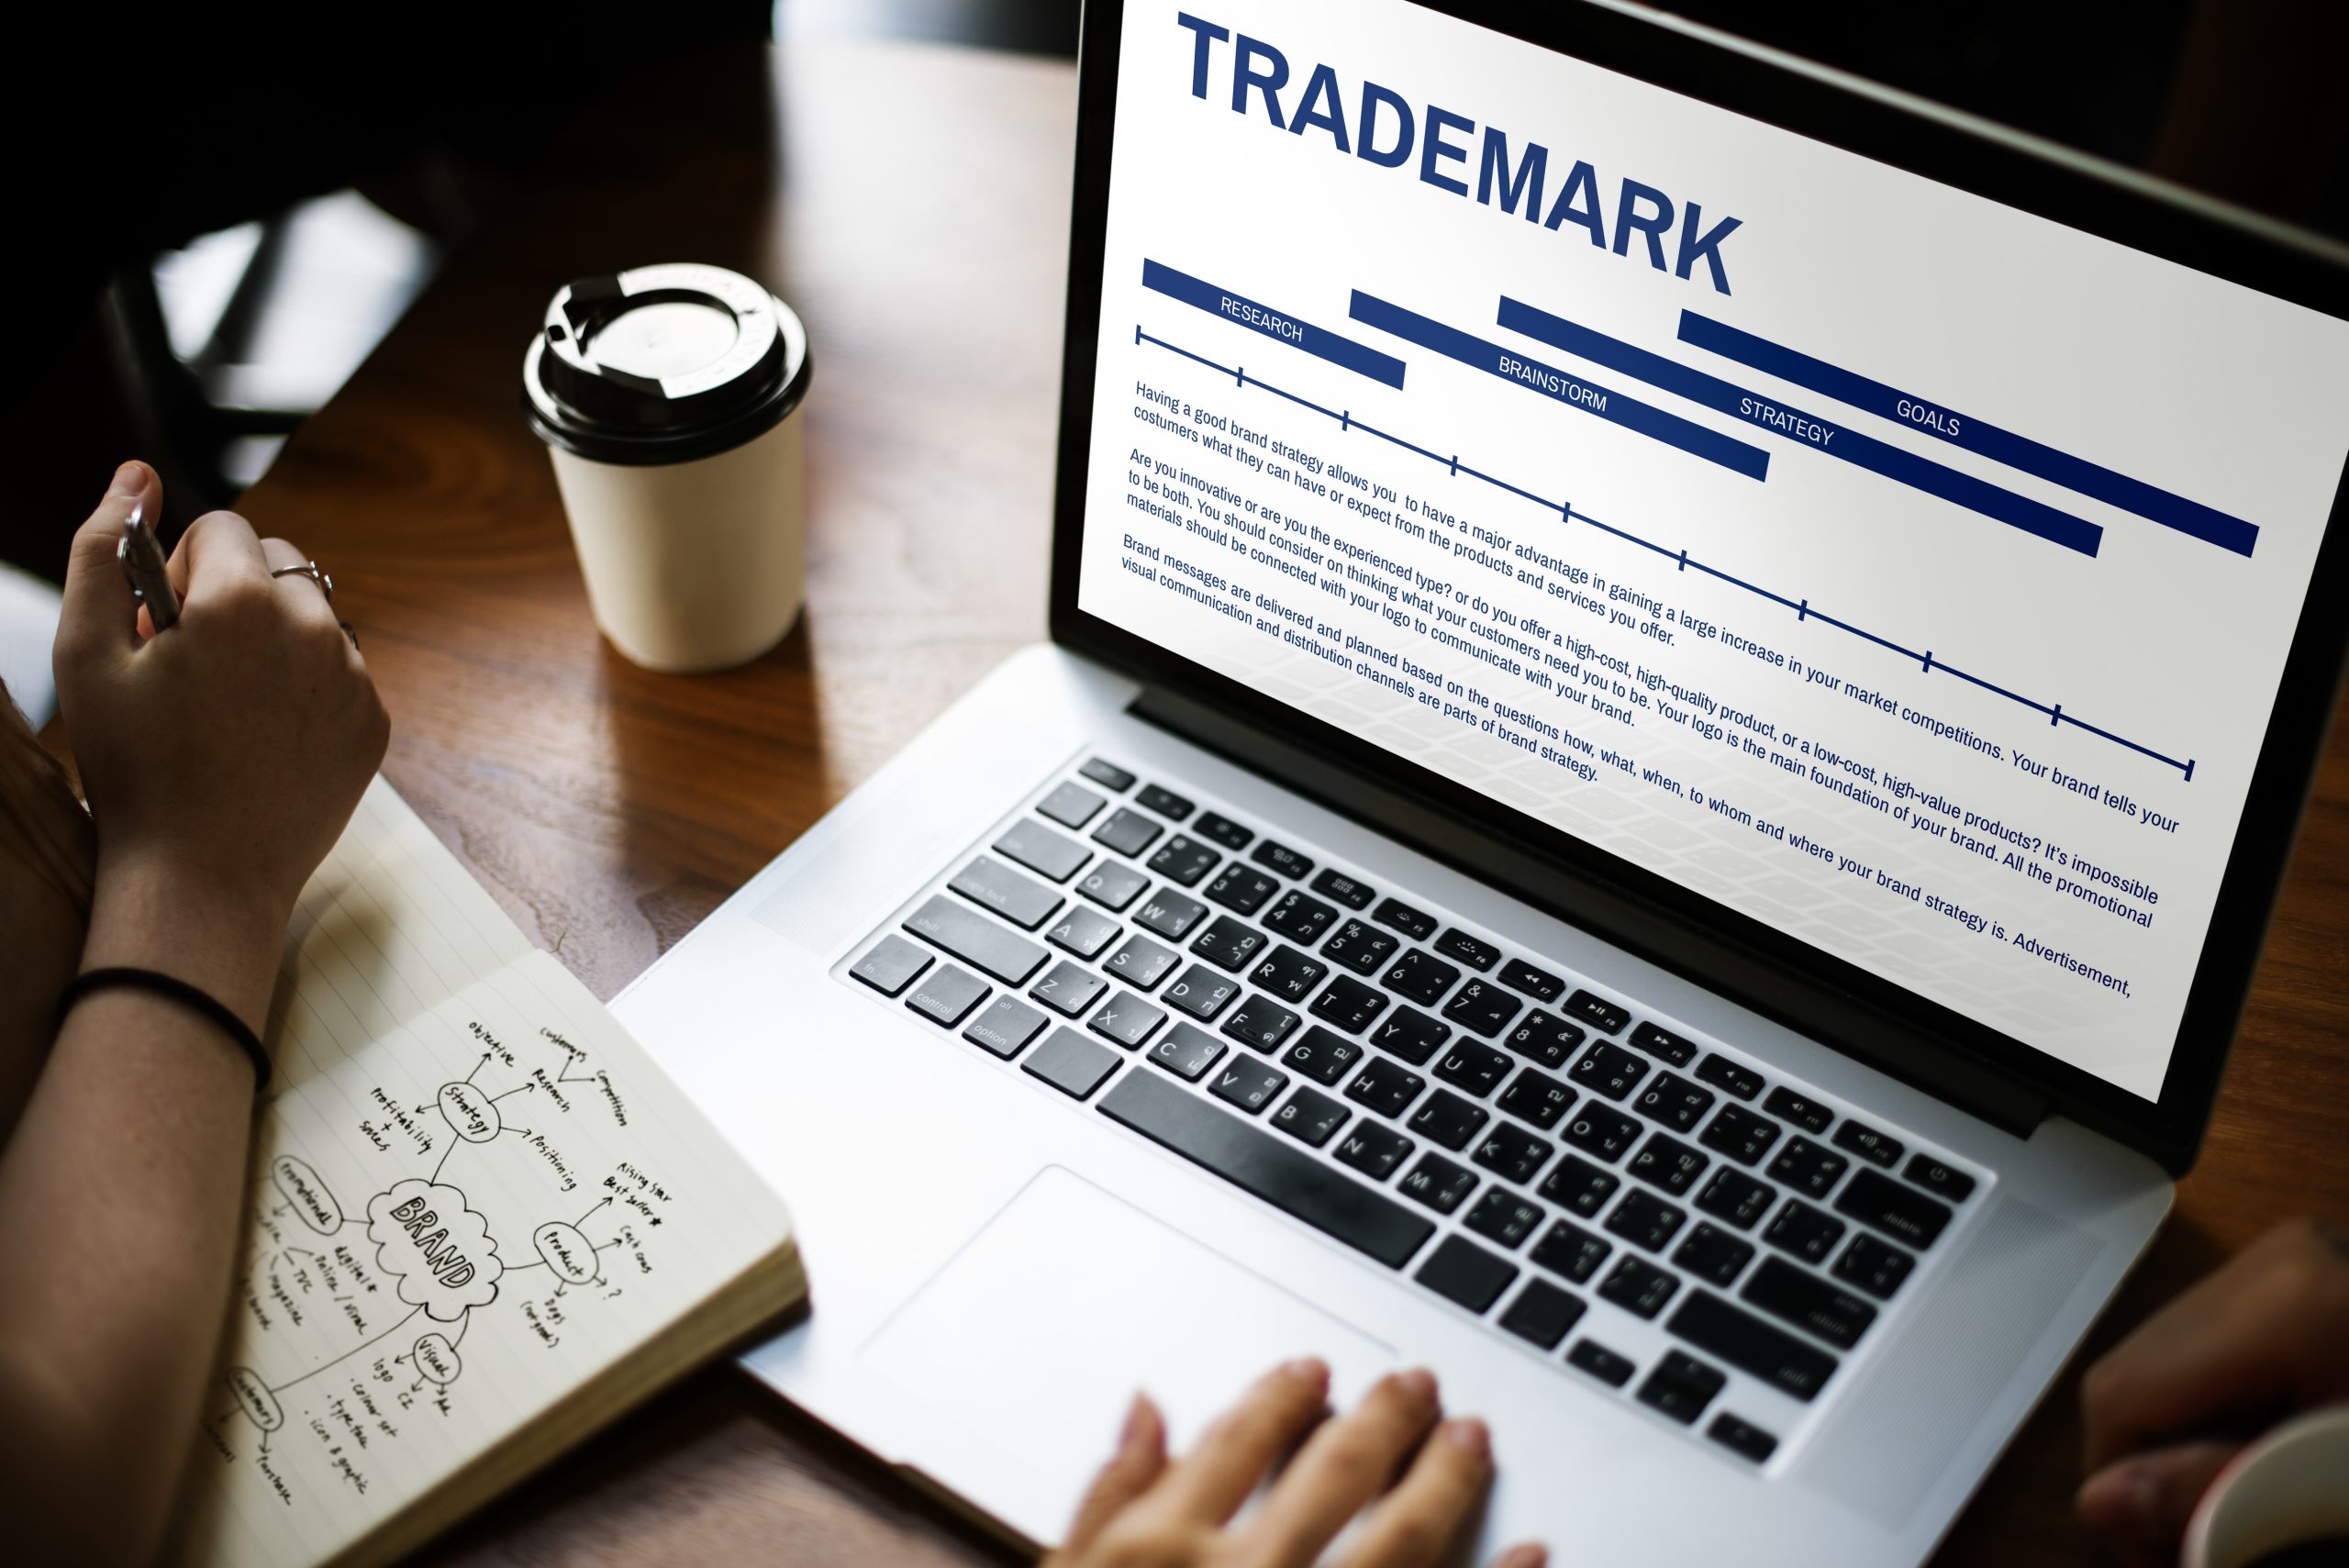 Trademark registration in the UAE is an important step for businesses.